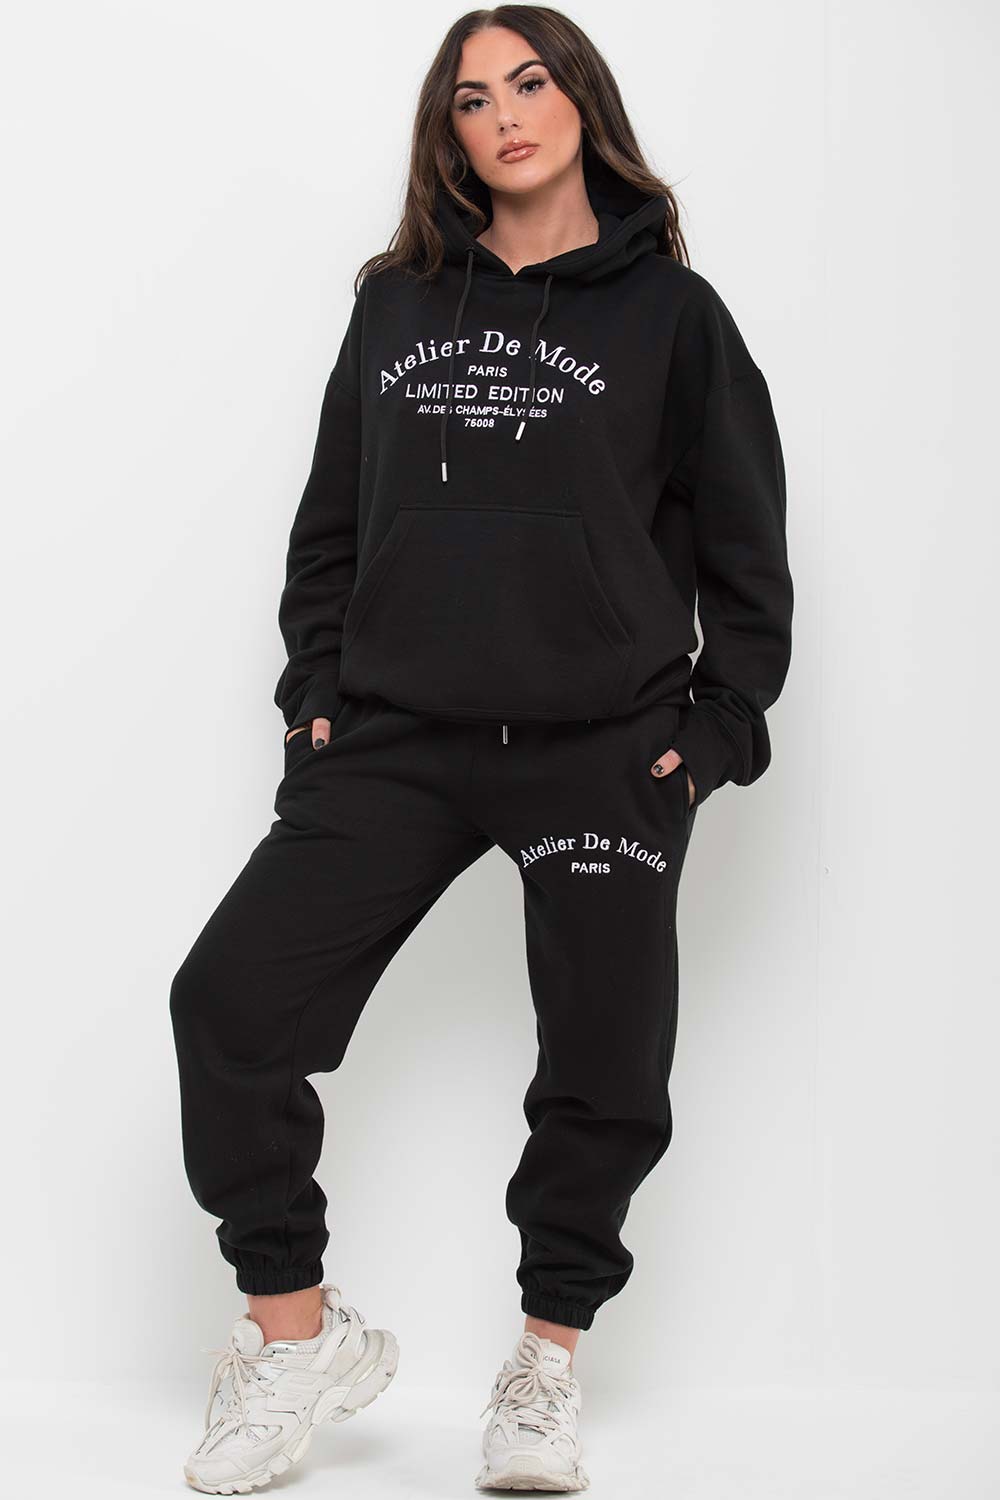 womens hoodie and joggers lounge wear set black limited edition slogan